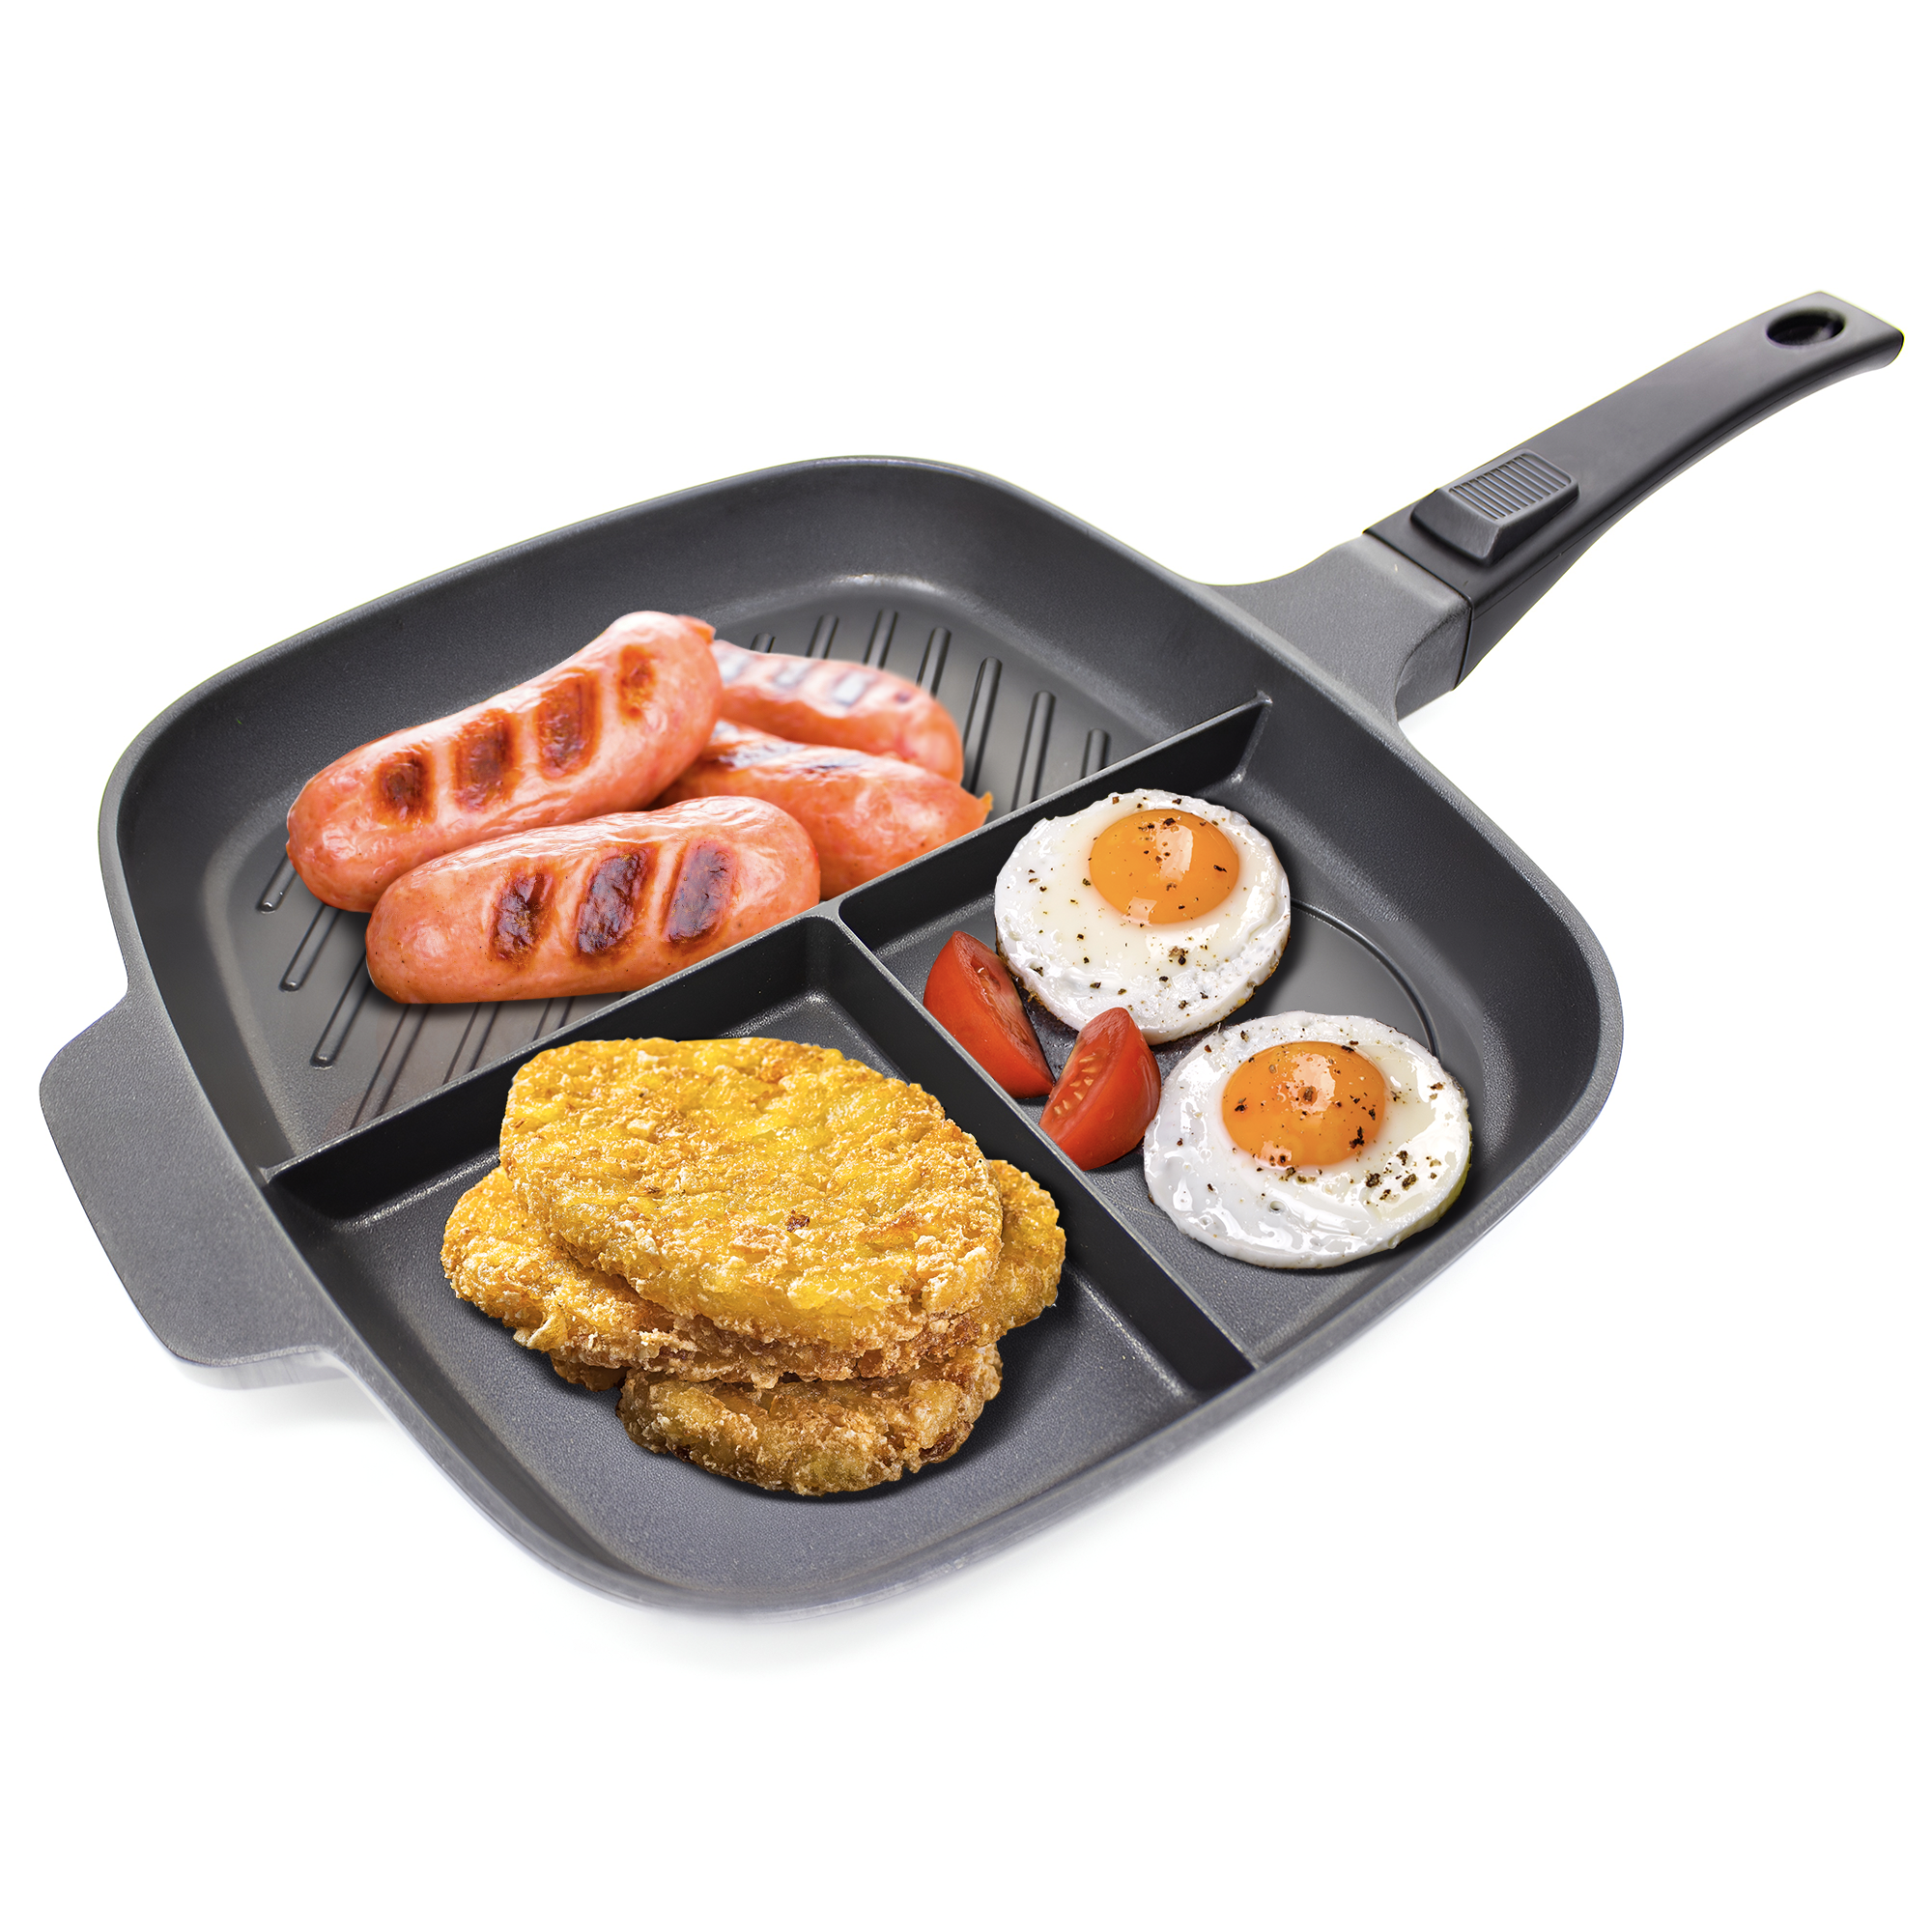  Jean-Patrique The Whatever Pan, Cast Aluminium Griddle Pan with  Glass Lid and The Whatever Pan Cookbook : Home & Kitchen